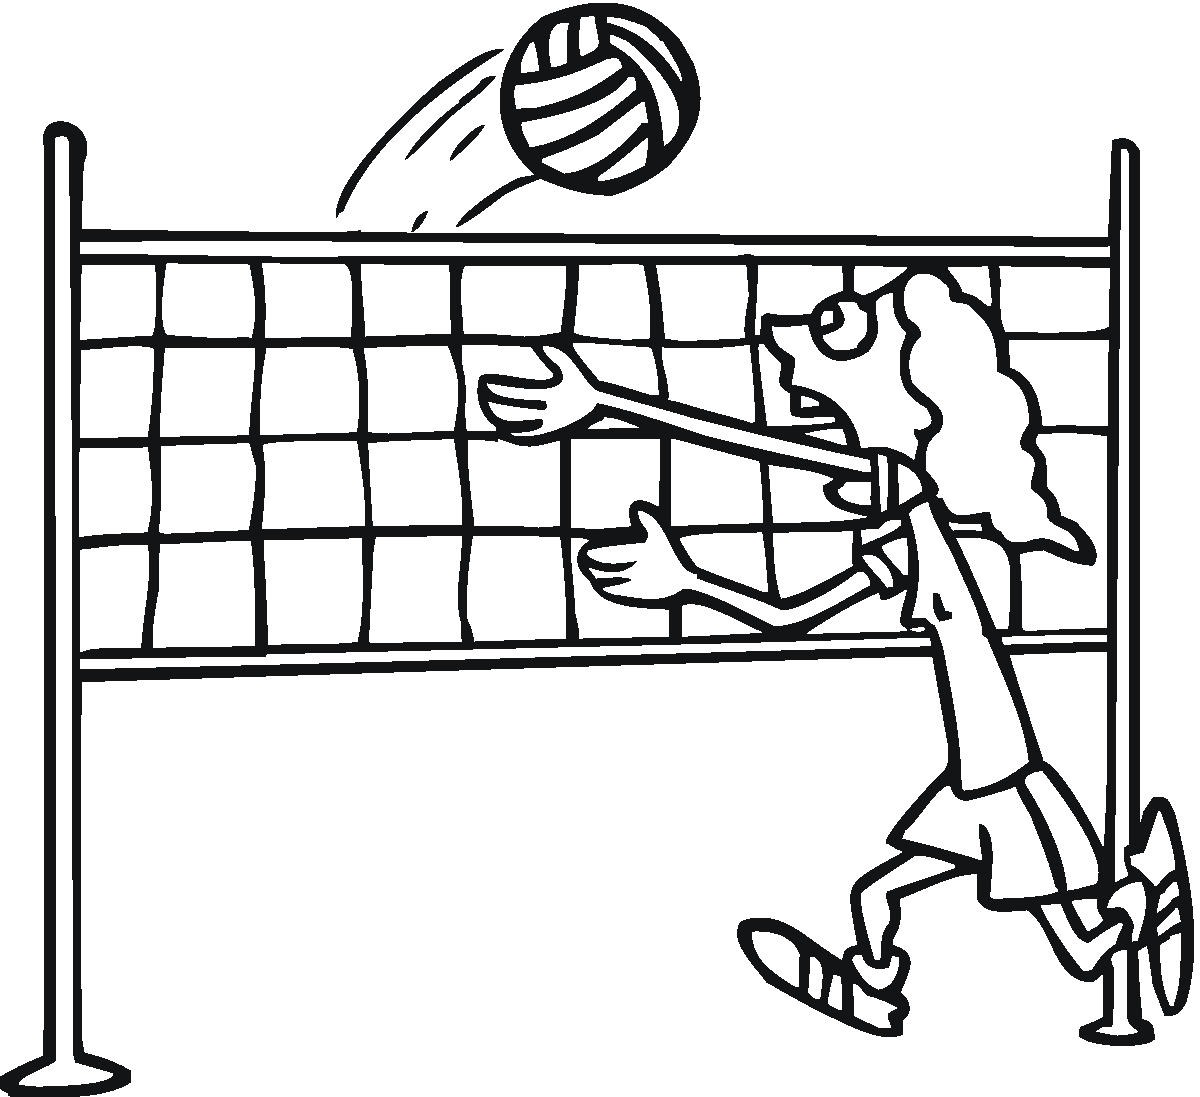 Volleyball Net Images   Clipart Best   Clipart Best